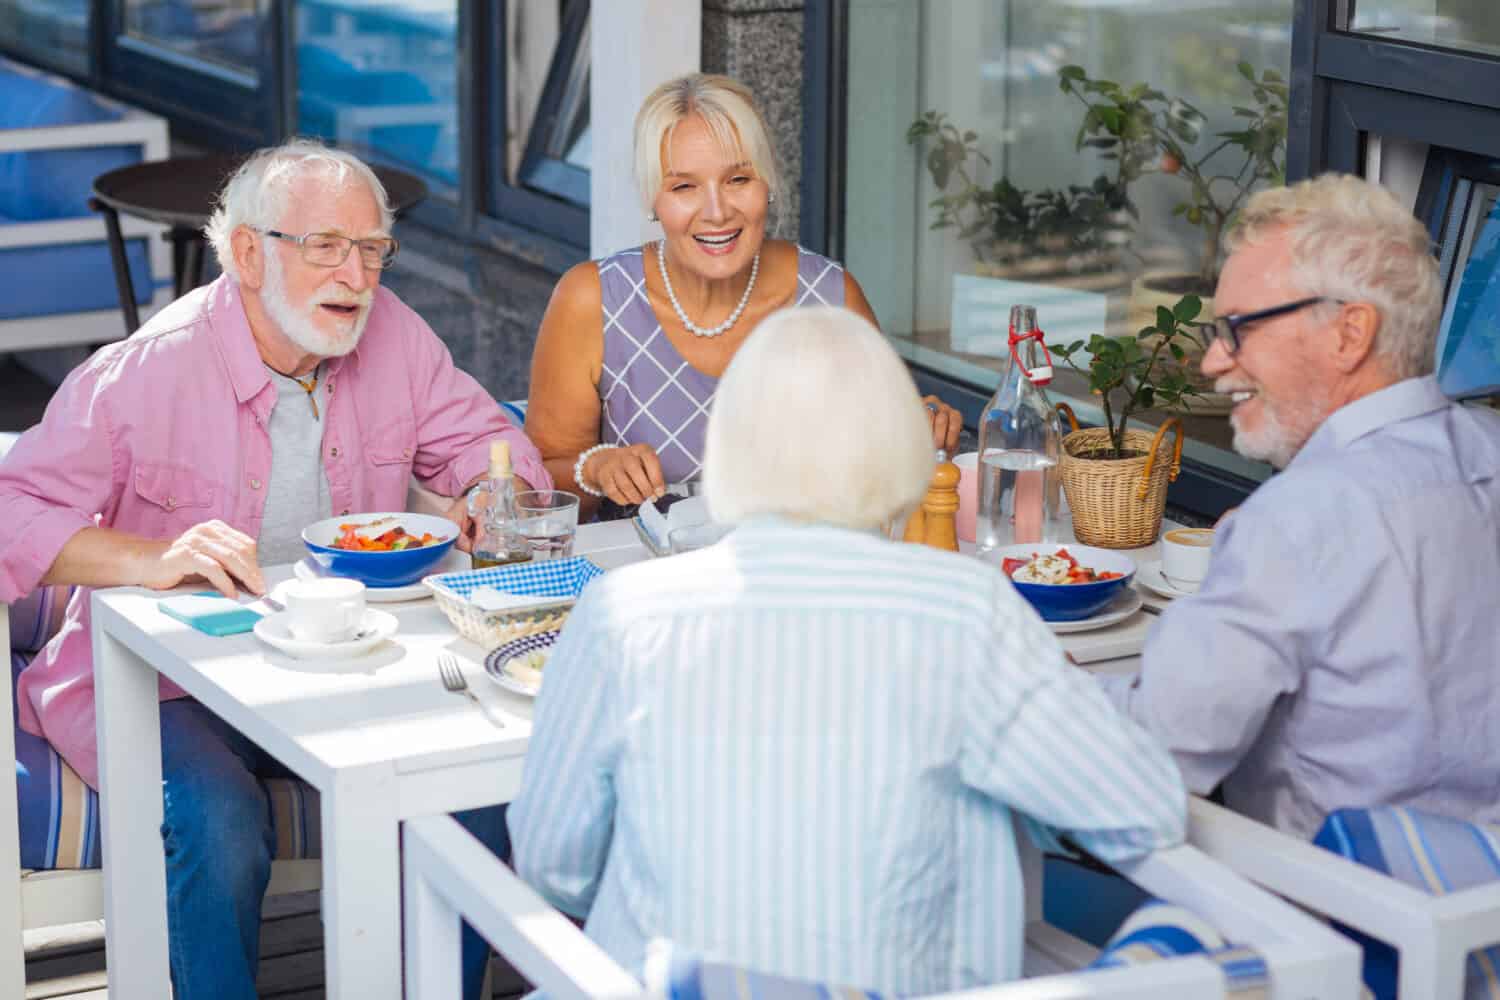 Pleasant meeting. Happy aged people talking during the meal while relaxing together in the restaurant